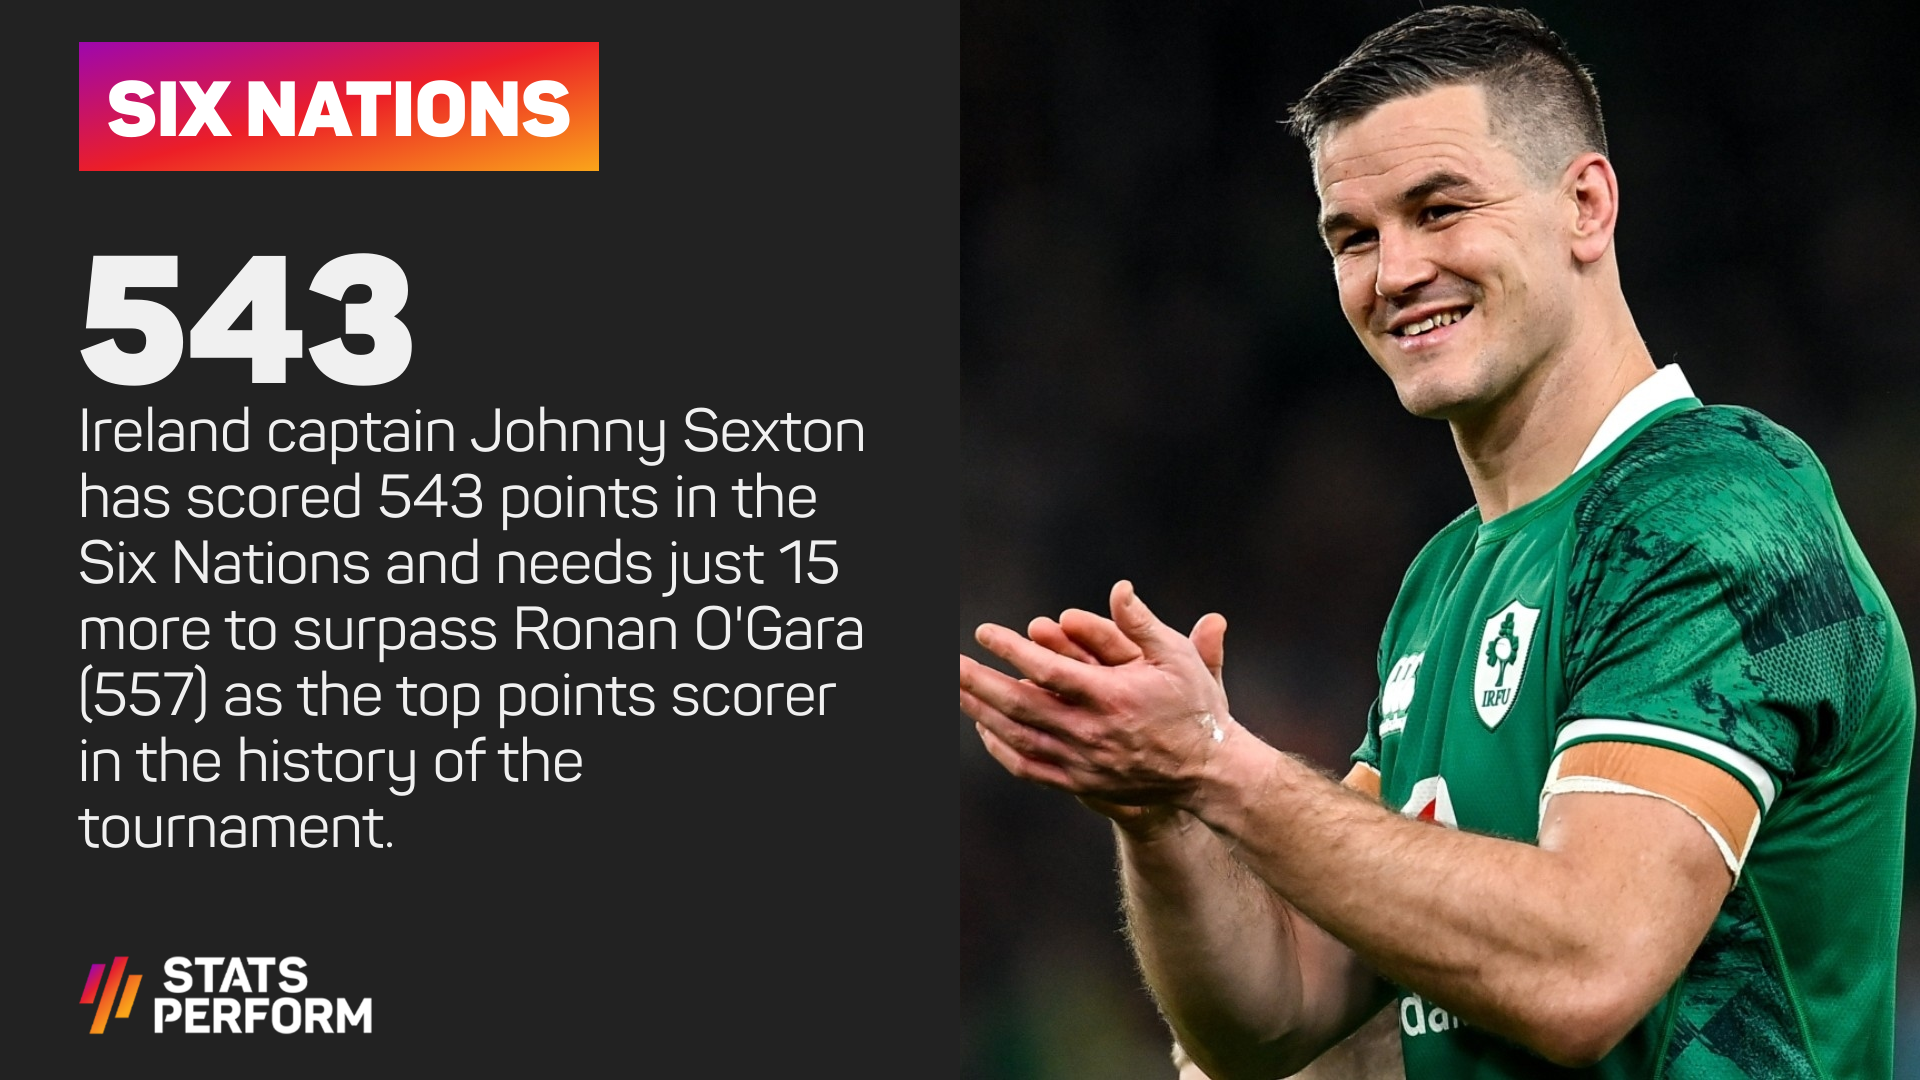 Ireland captain Johnny Sexton has scored 543 points in the Six Nations